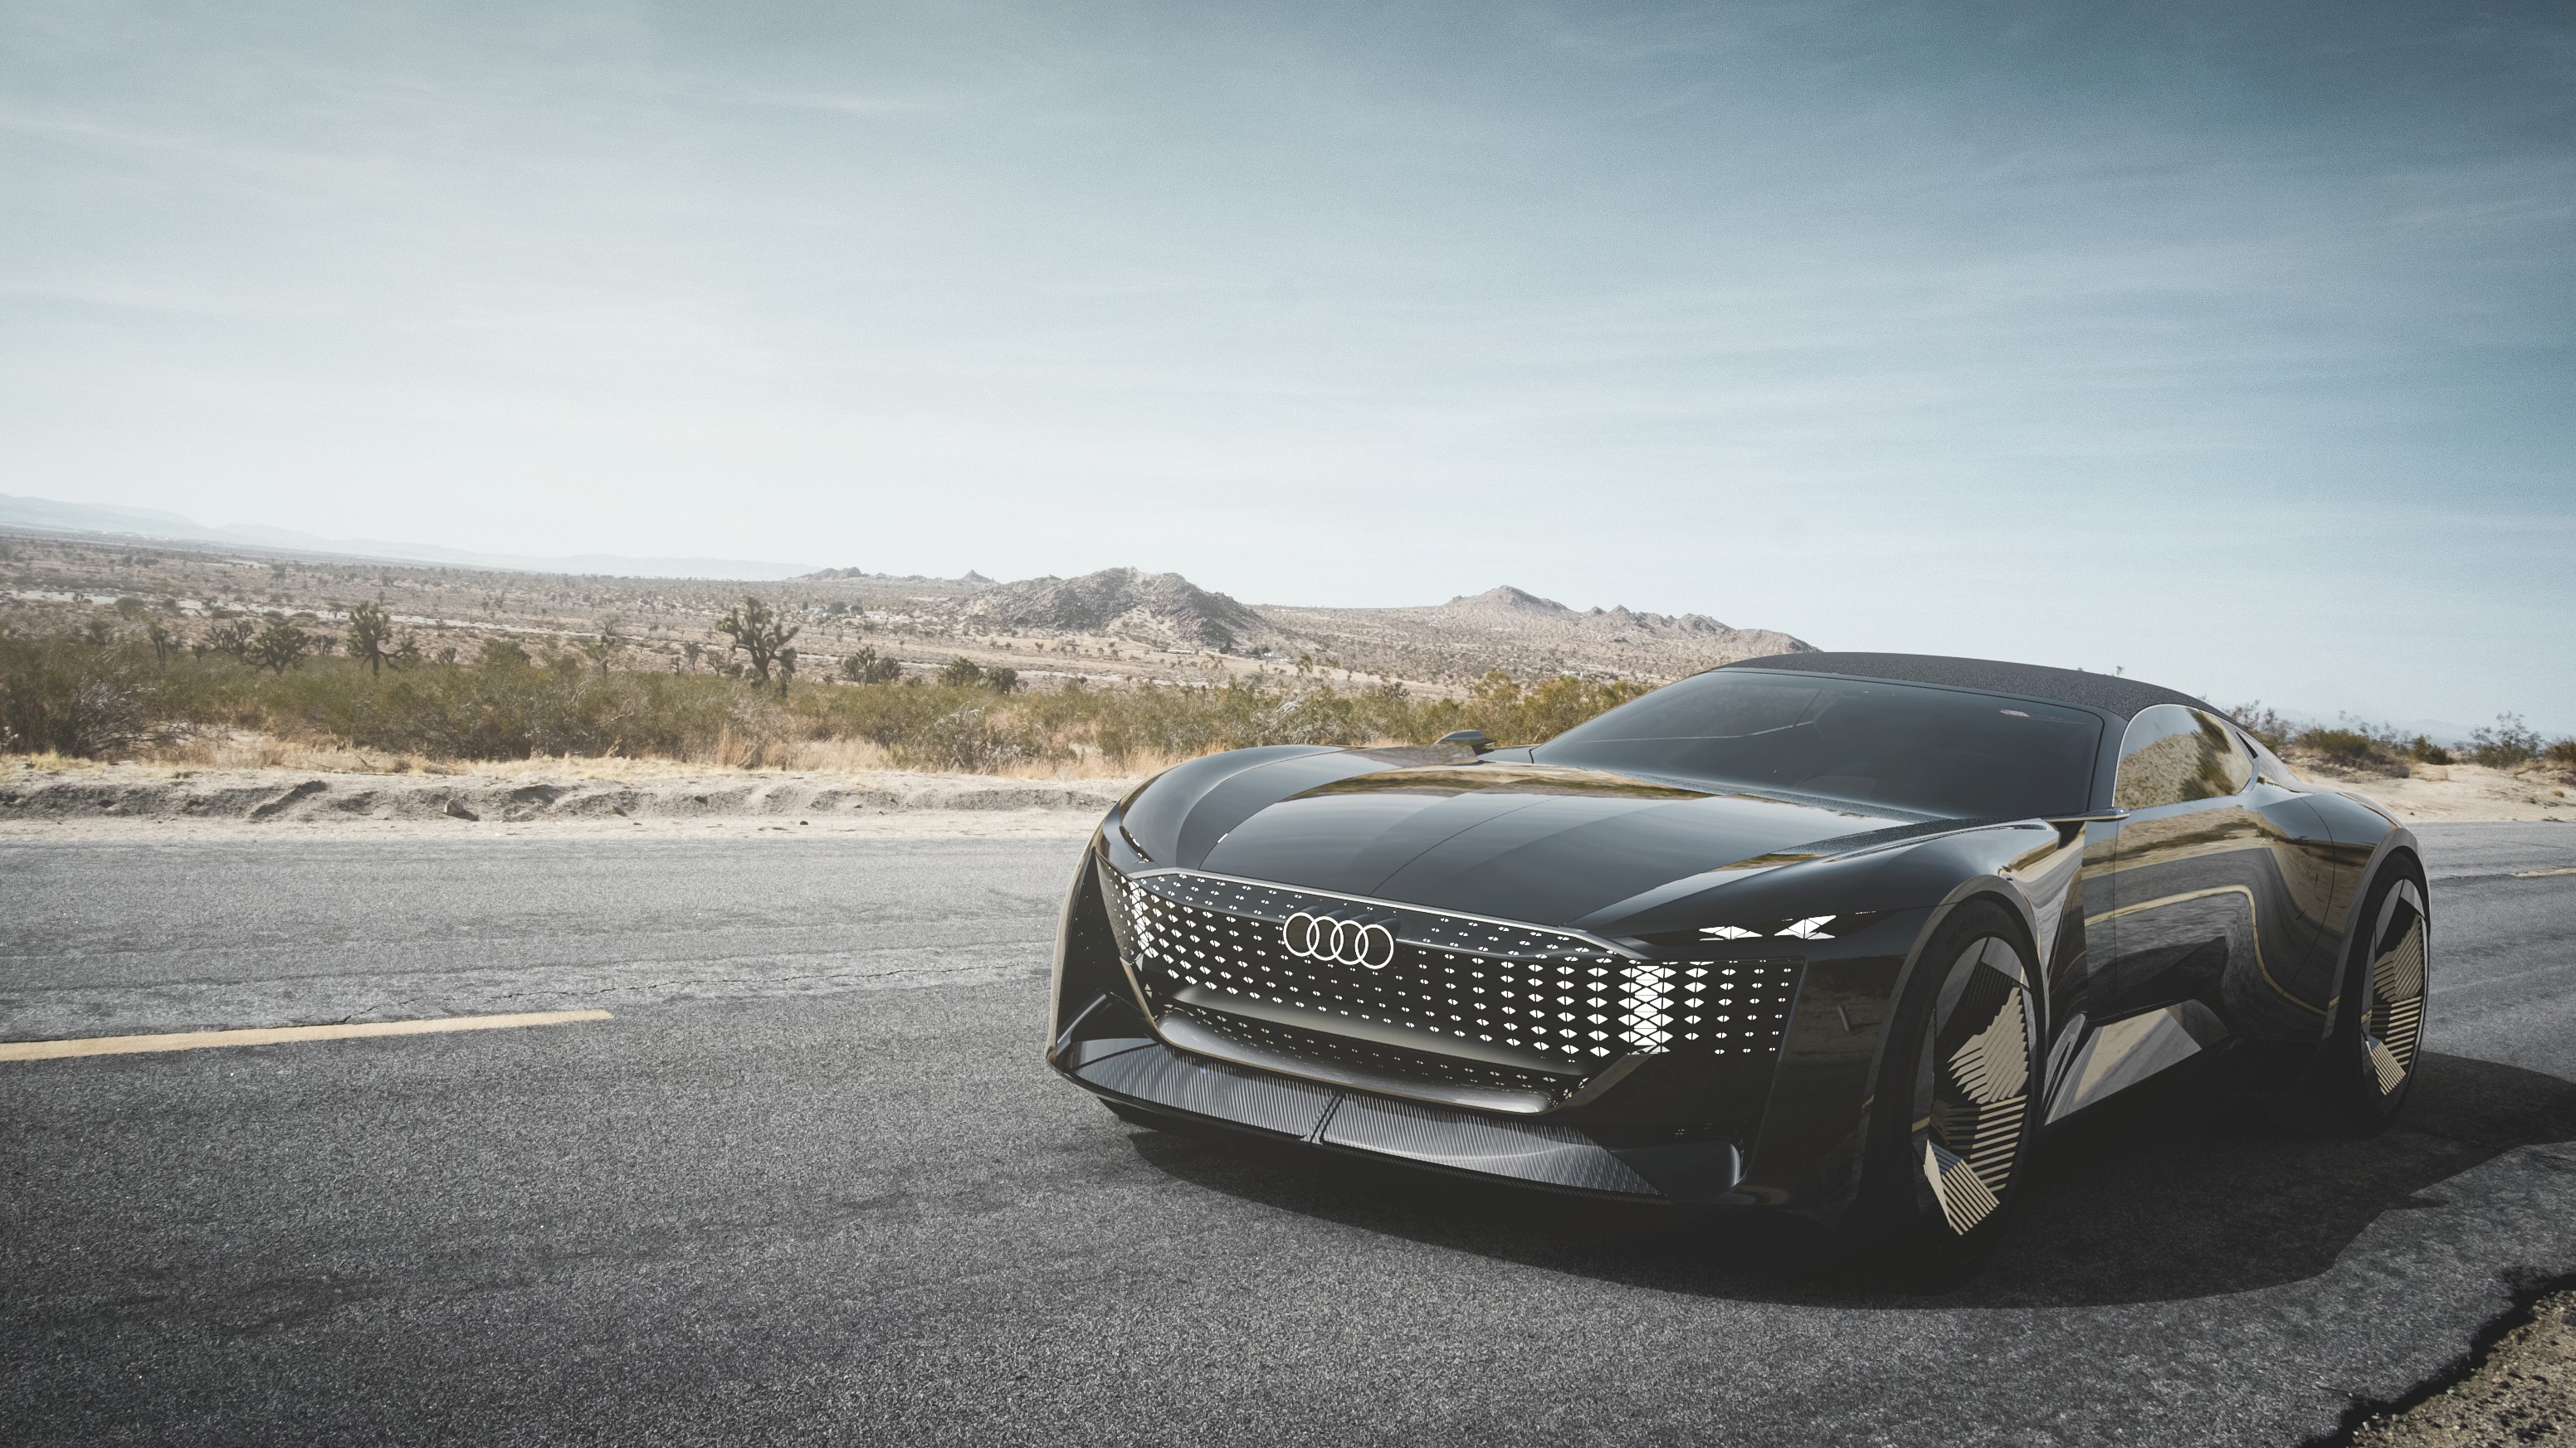 Audi Launches New Concept Series with skysphere Roadster